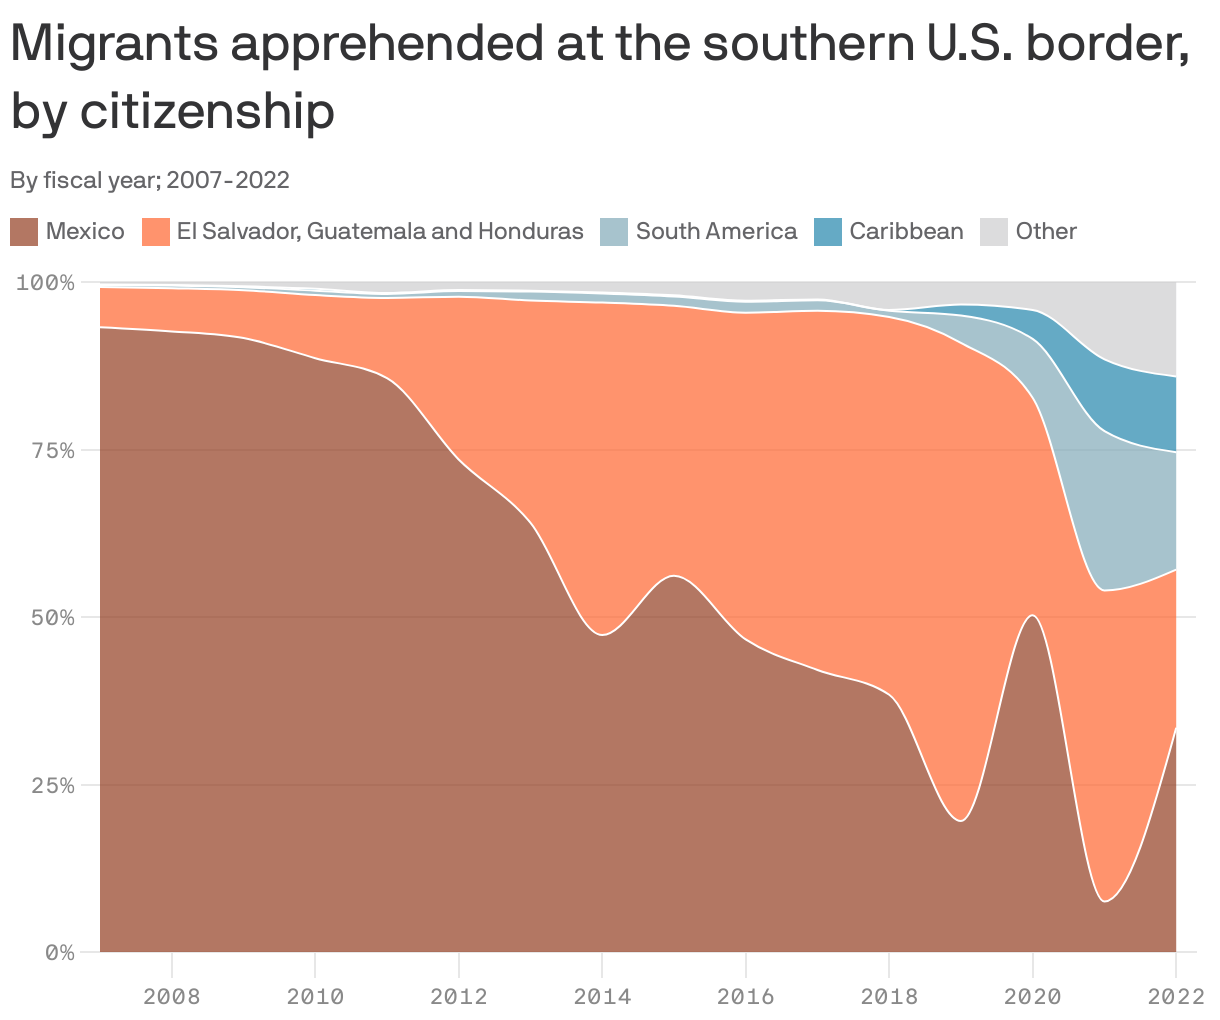 Migrants apprehended at the southern U.S. border, by citizenship